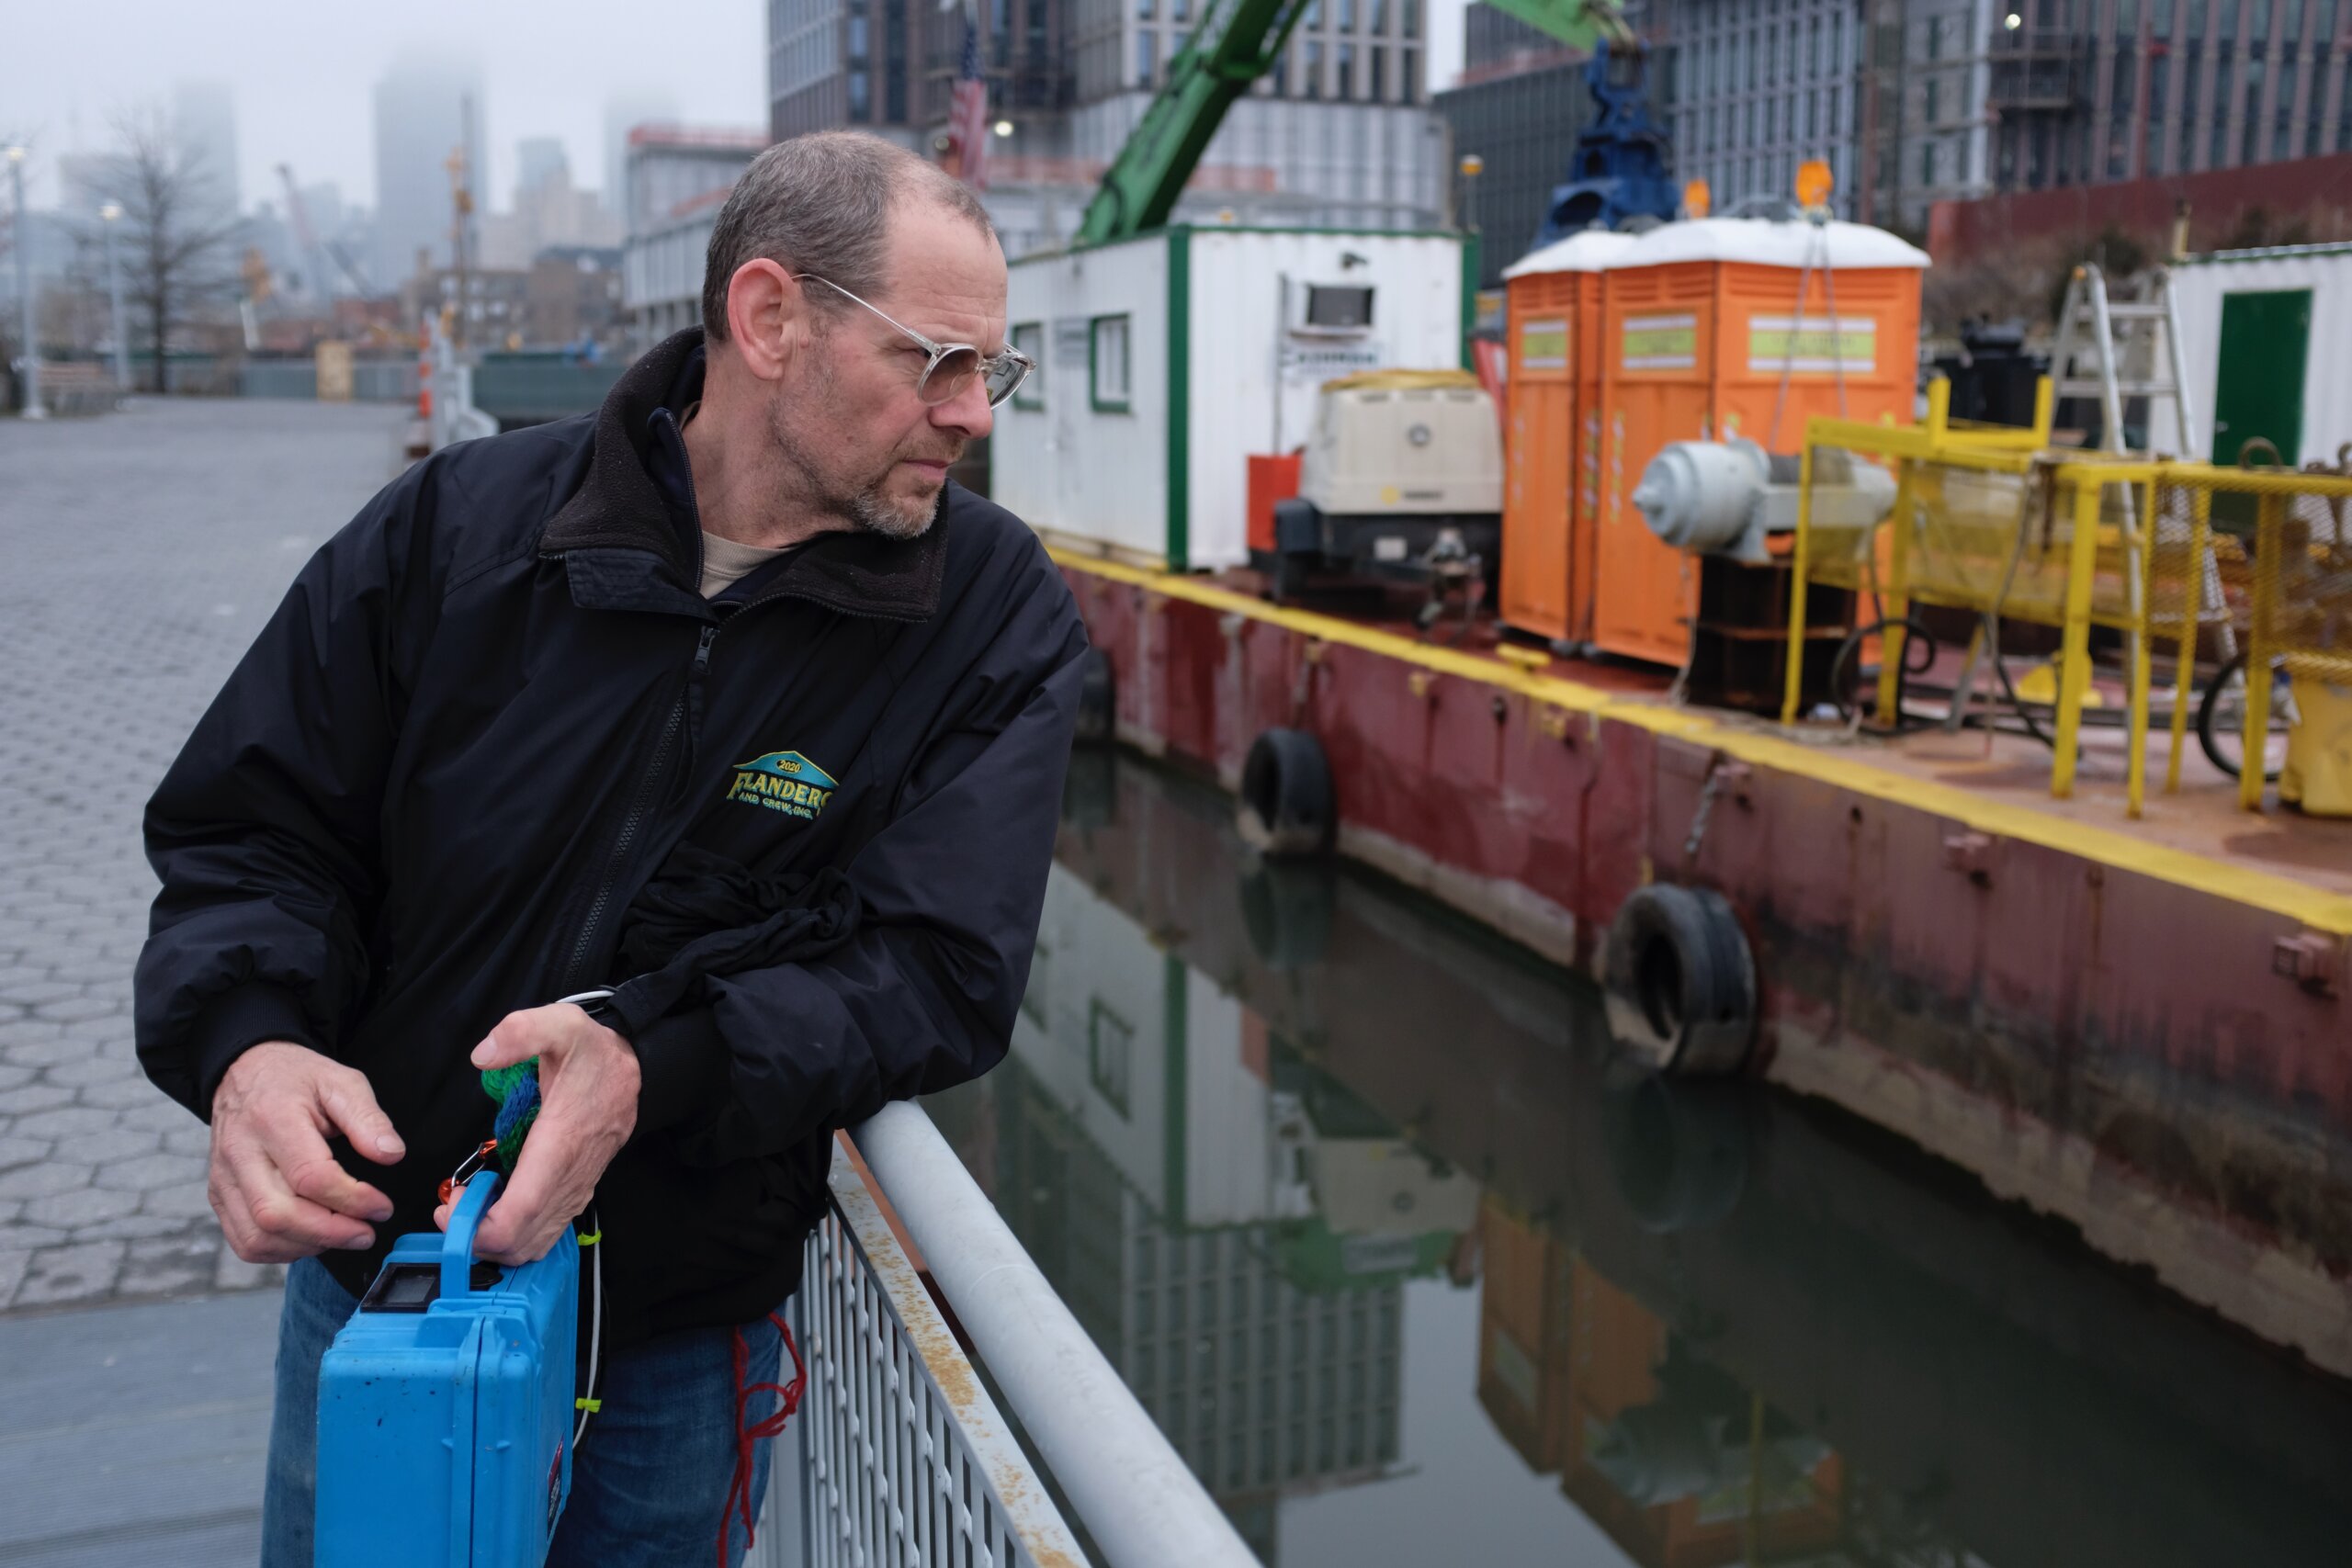 Frustrated by lack of water quality data, citizen scientist Gary